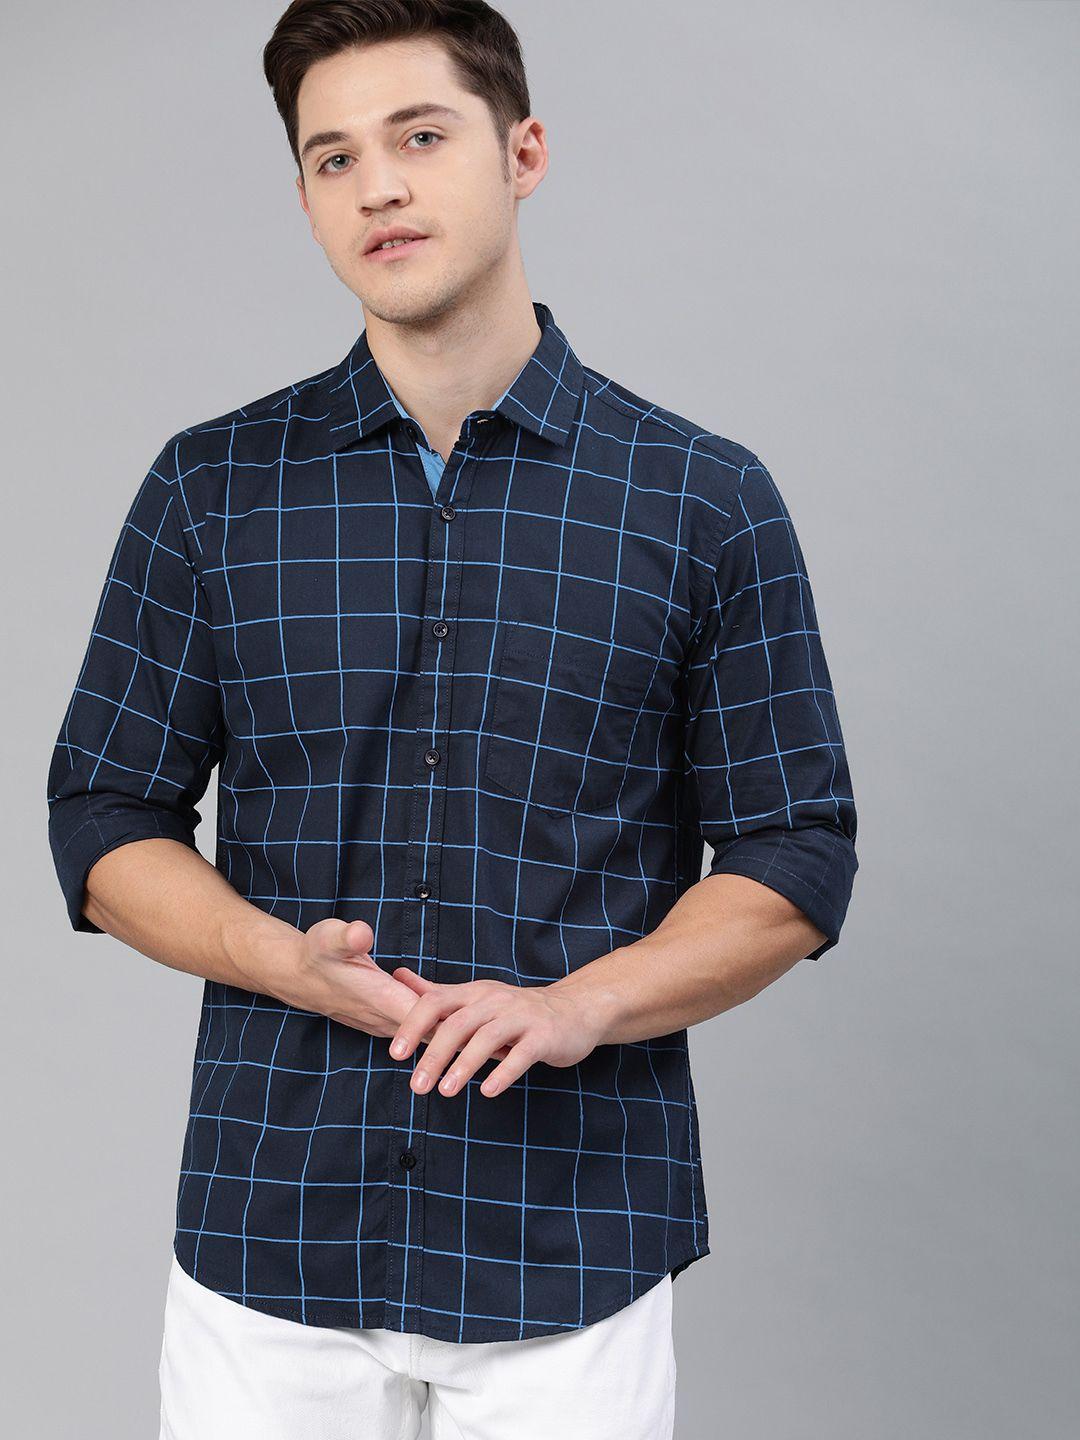 ivoc men navy blue slim fit checked casual shirt